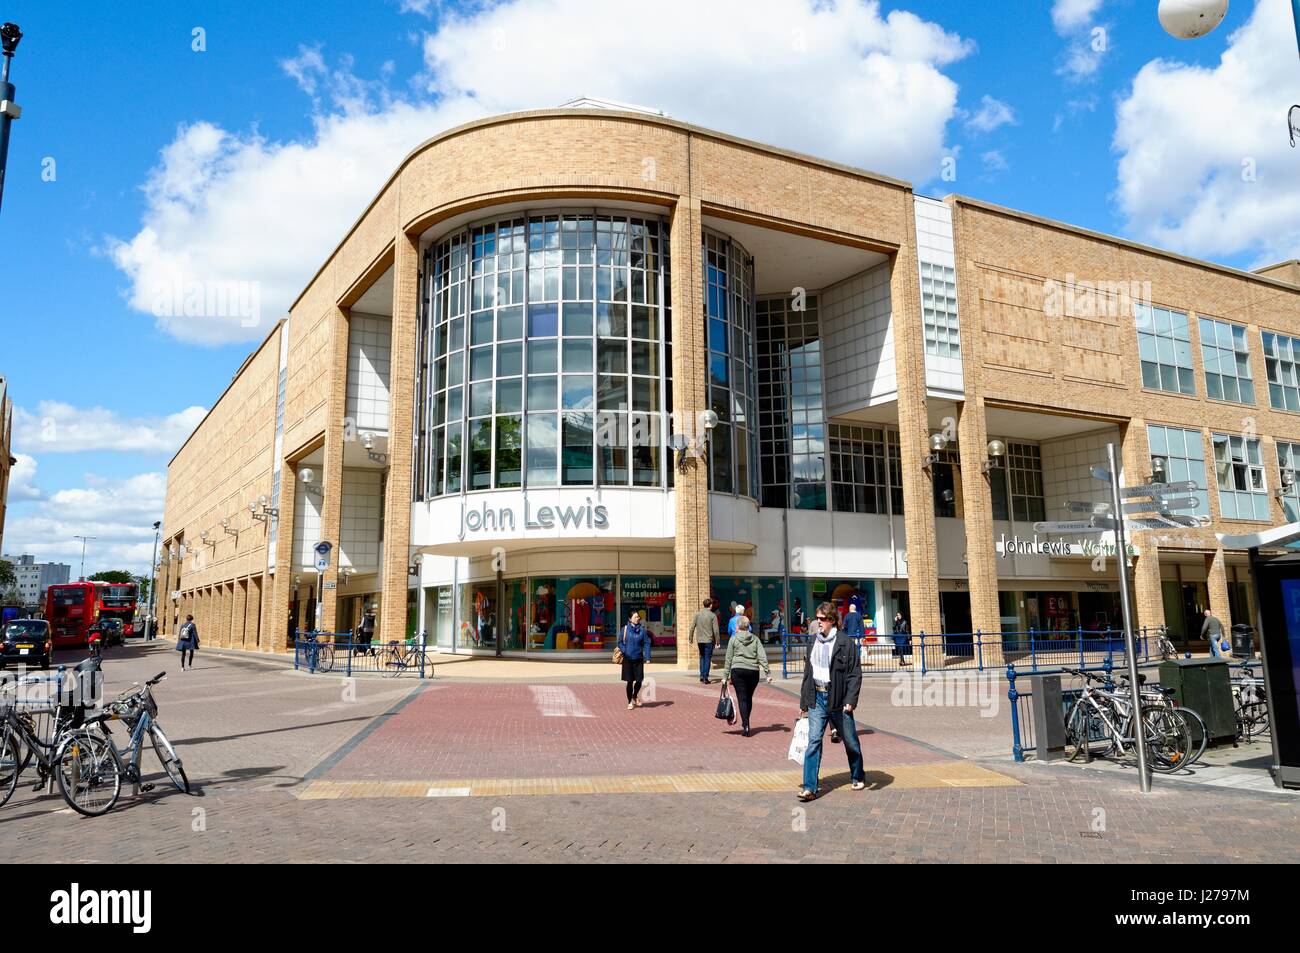 Exterior of the John Lewis department store in Kingston on Thames Surrey UK Stock Photo